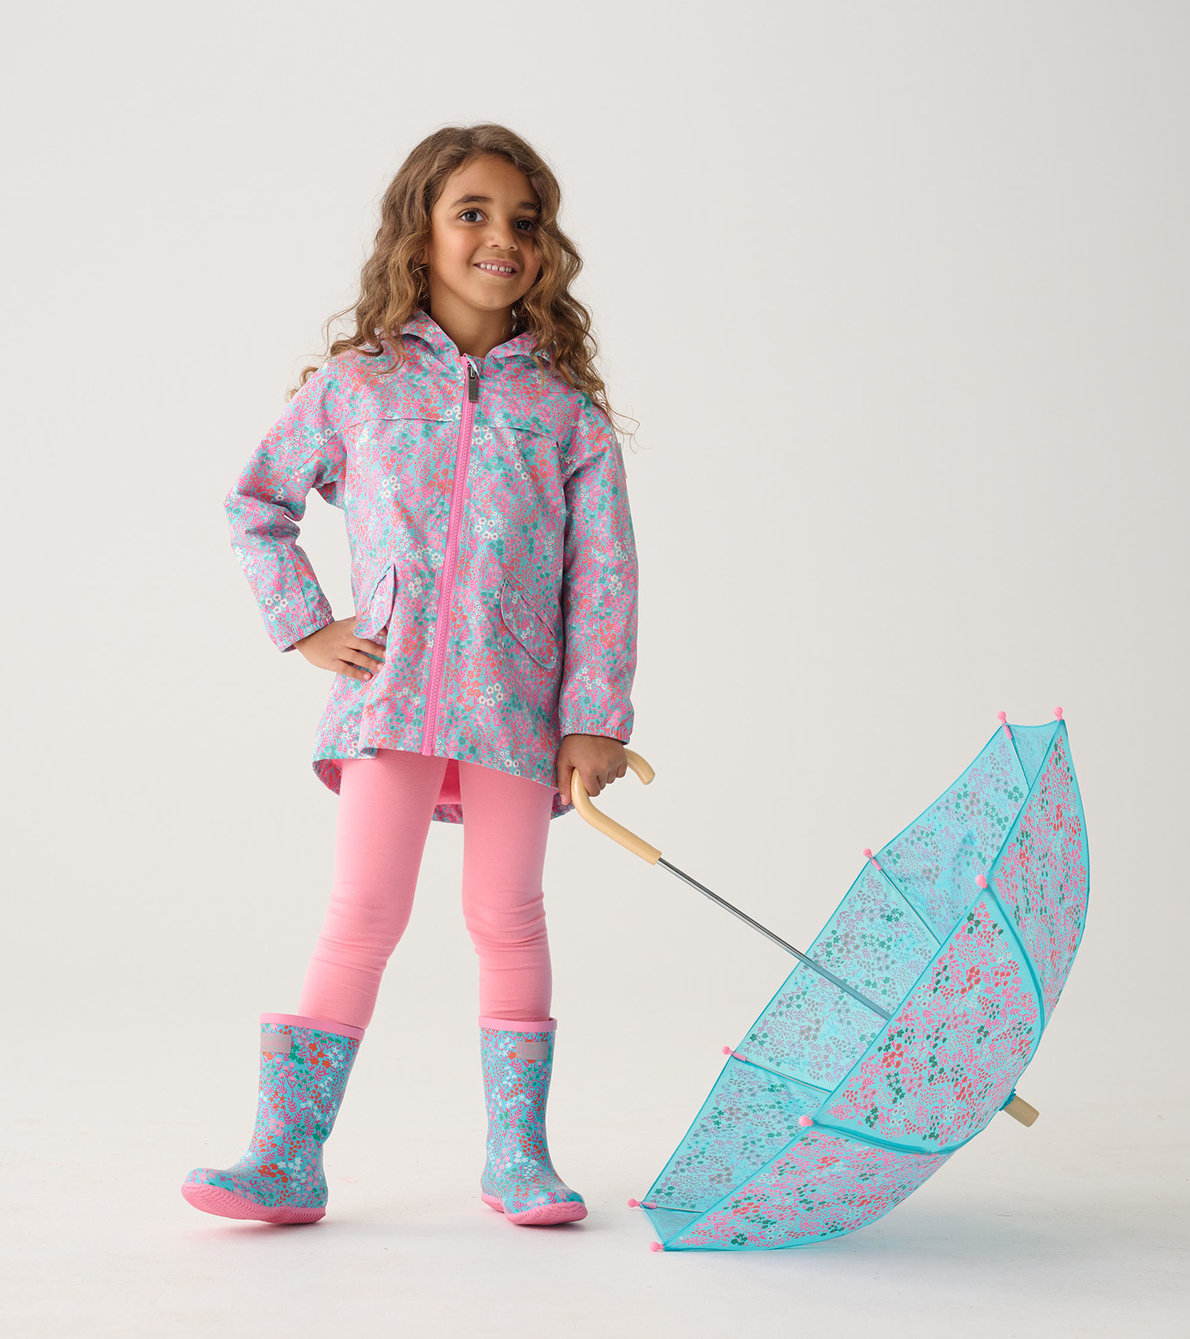 View larger image of Girls Ditsy Floral Packable Rain Boots